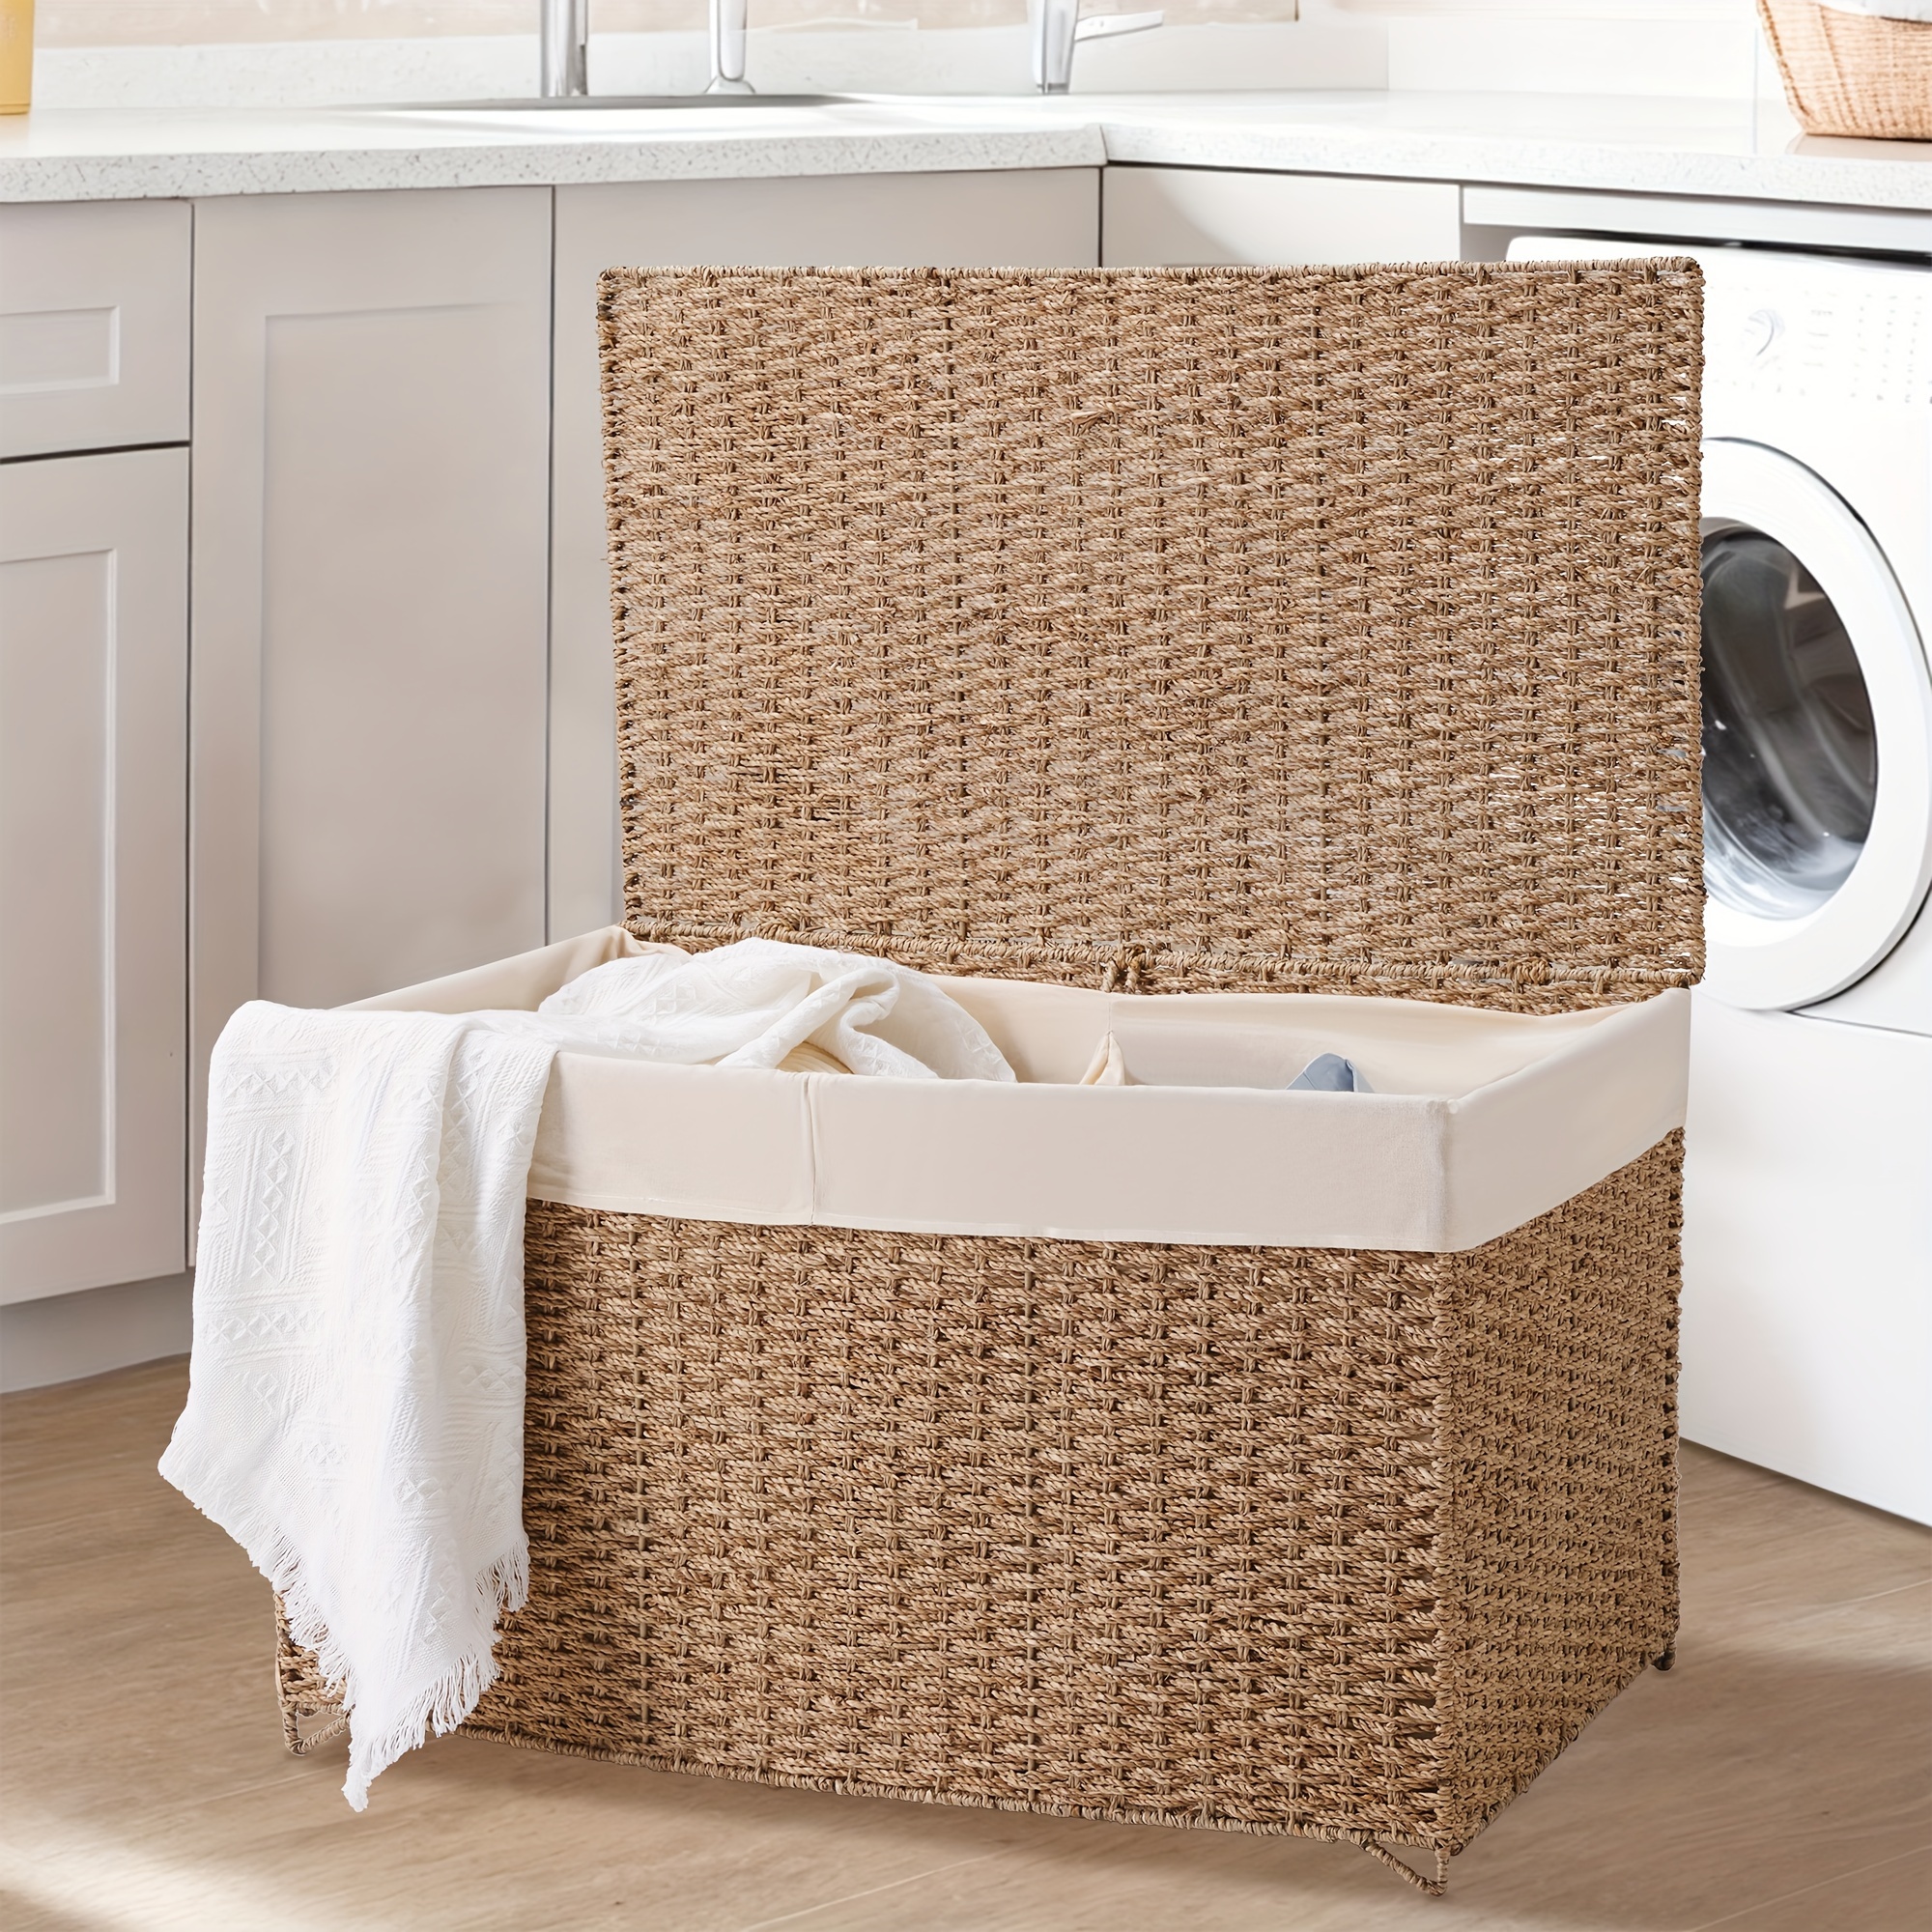 

1pc Double Laundry Hamper With Lid - 160l (42 Gallon) Natural Seagrass Hand Woven Clothes Toy Storage Basket With 2 Section Removable Liner, Foldable Rattan Hamper Trunk For Bathroom, Bedroom